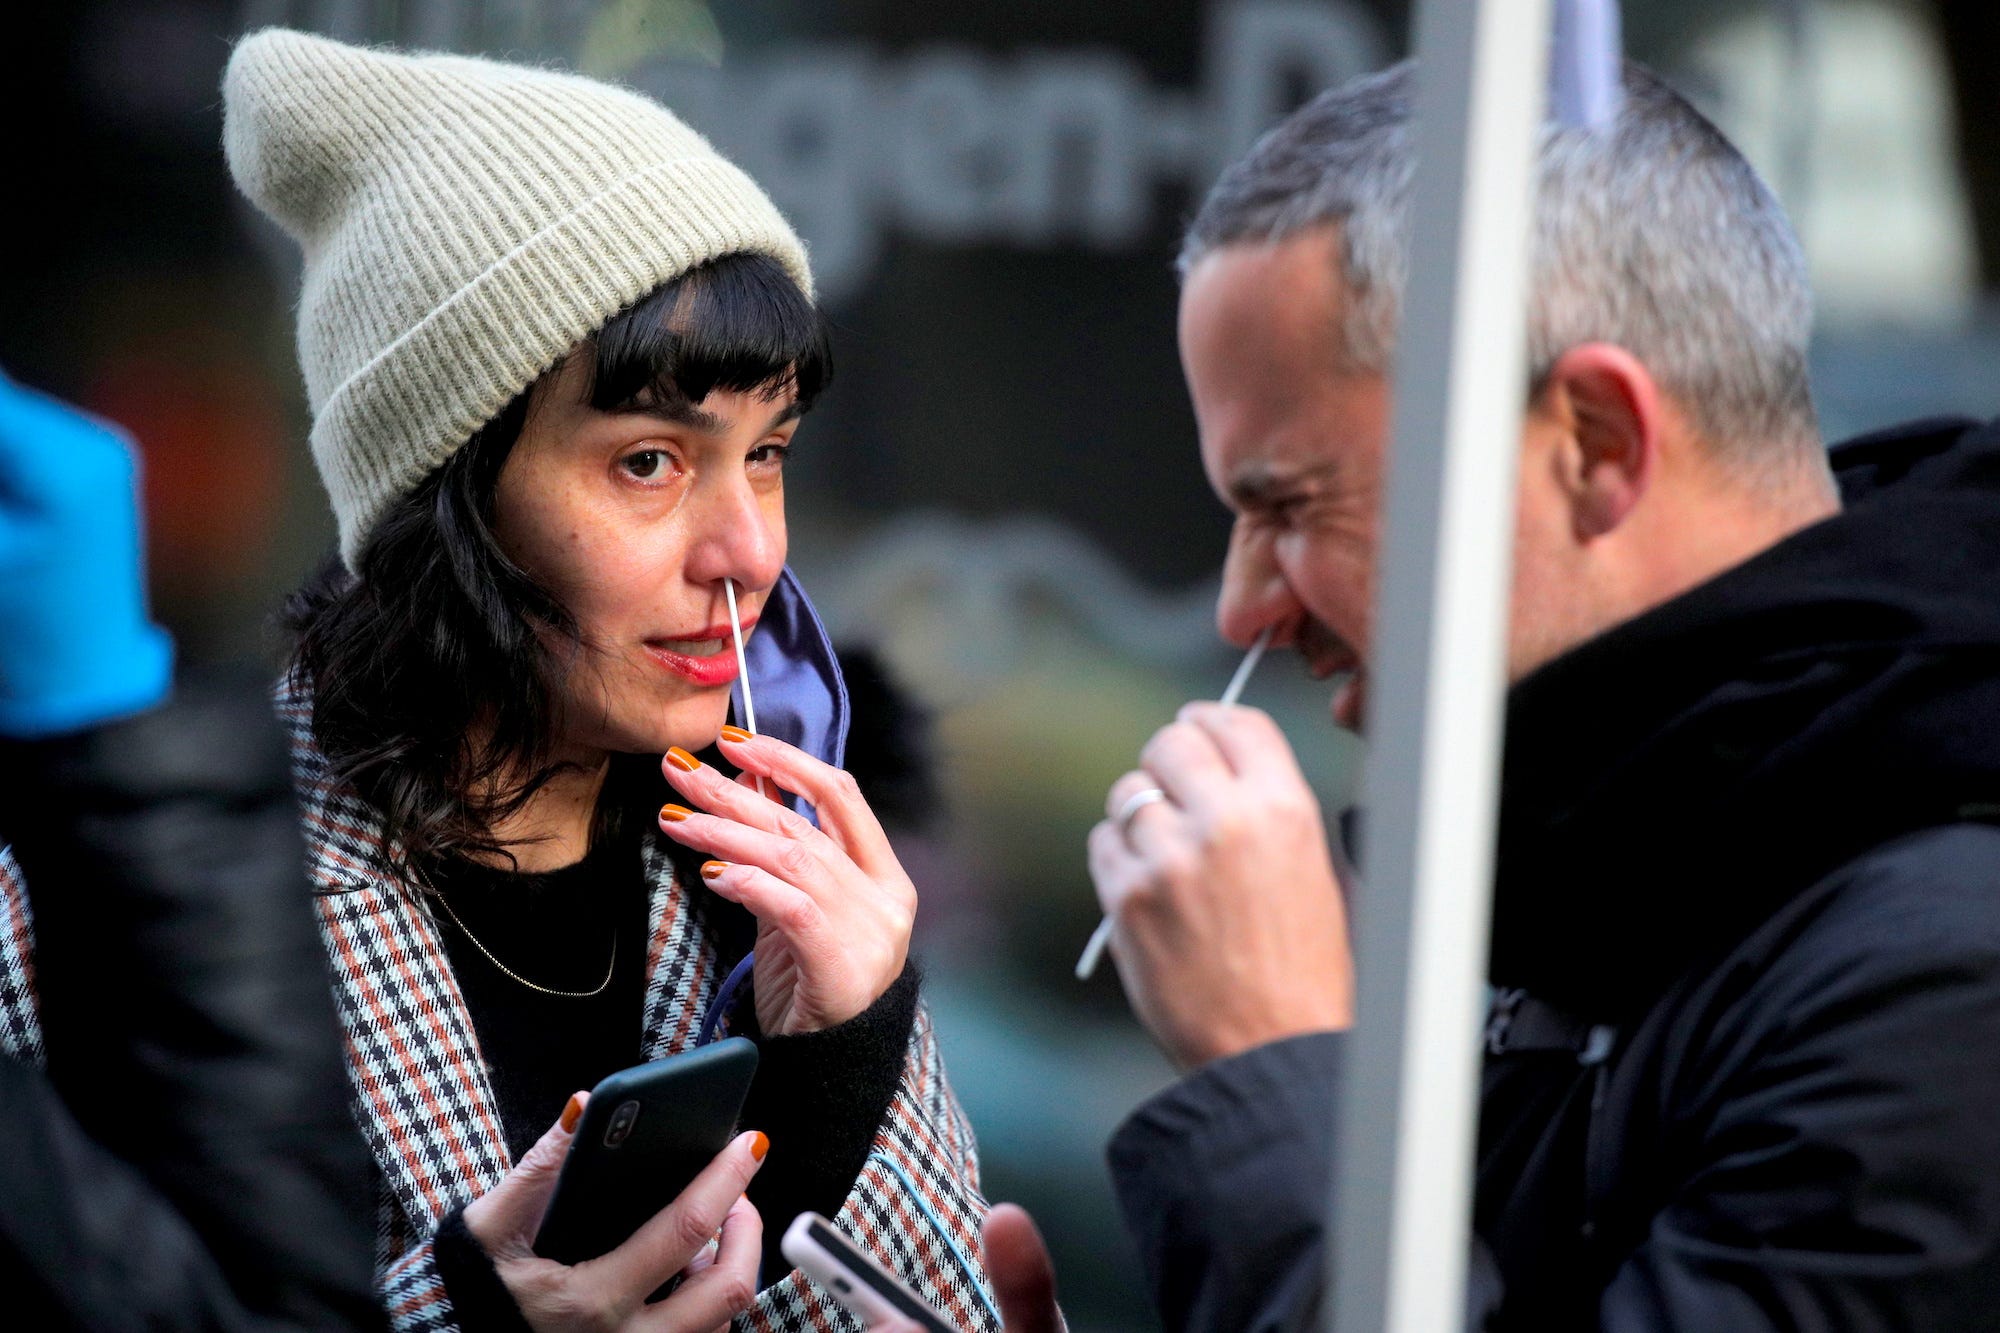 A man whinges while swabbing his nose for a covid test in New York City, USA on December 7, 2021, while a woman also swabbing her nose looks at him,